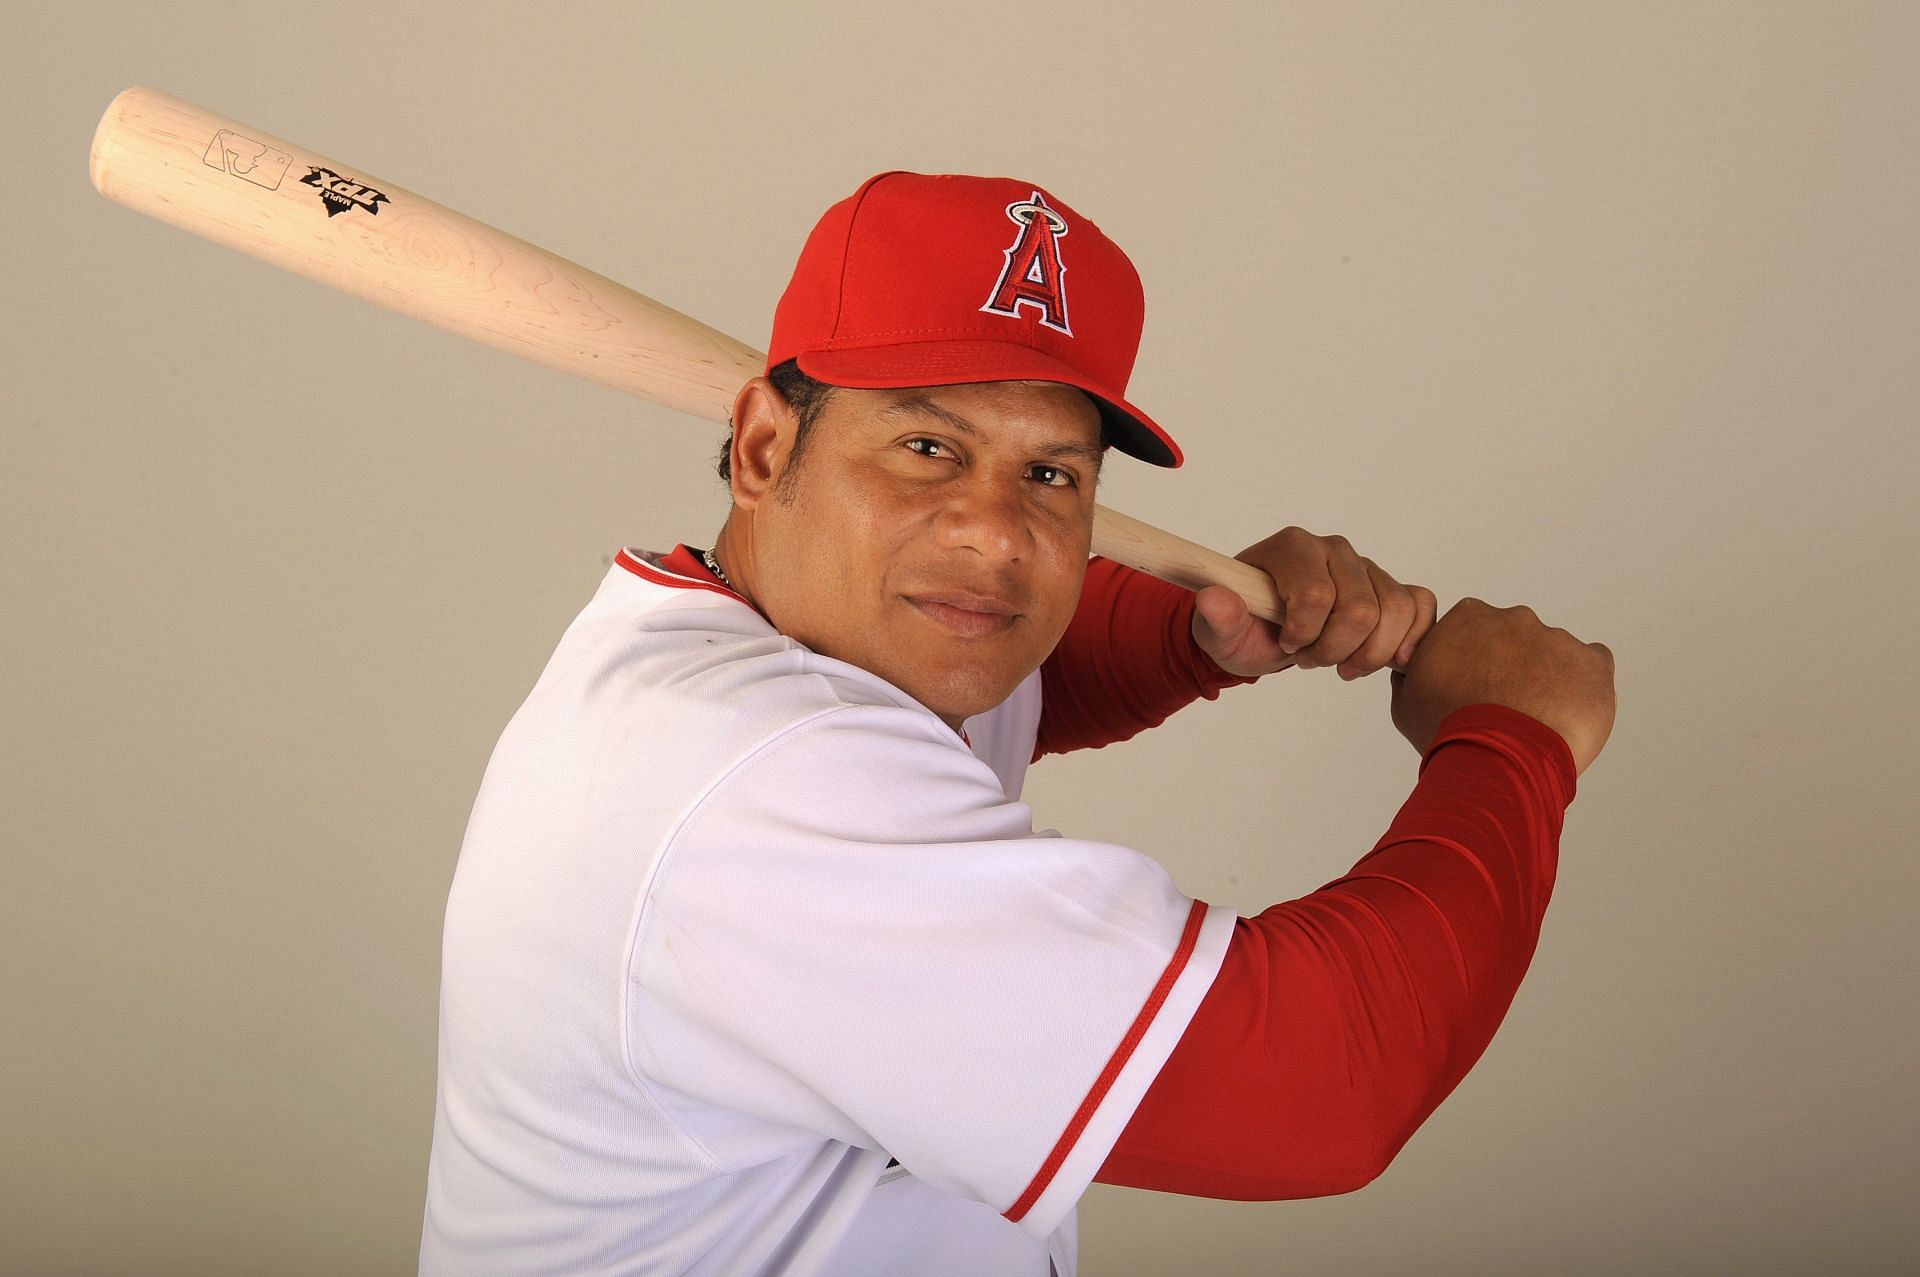 Bobby Abreu played for the Astros and Angels